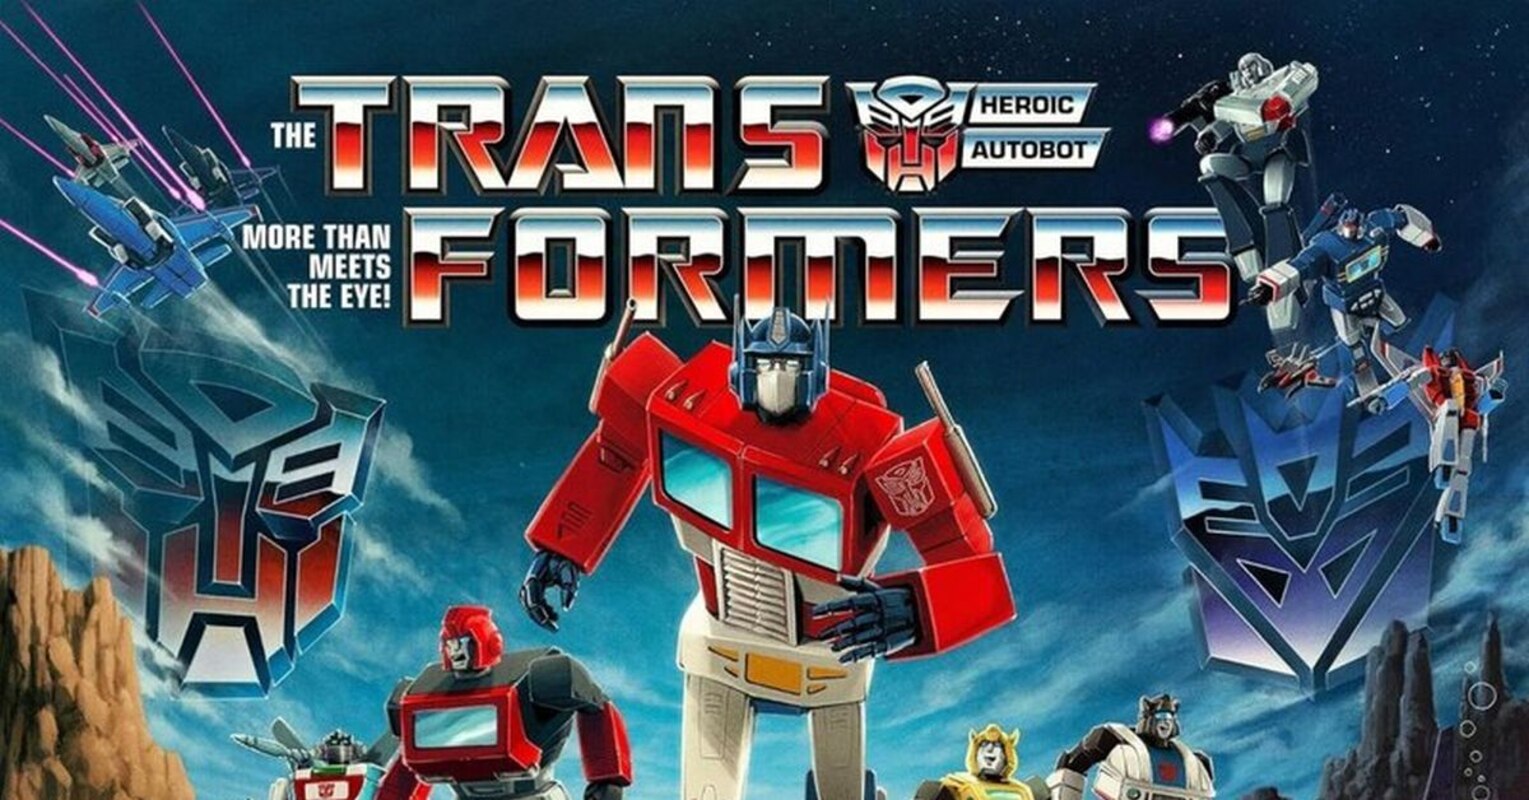 Music from the original animated series “Transformers G1” will be released on July 26